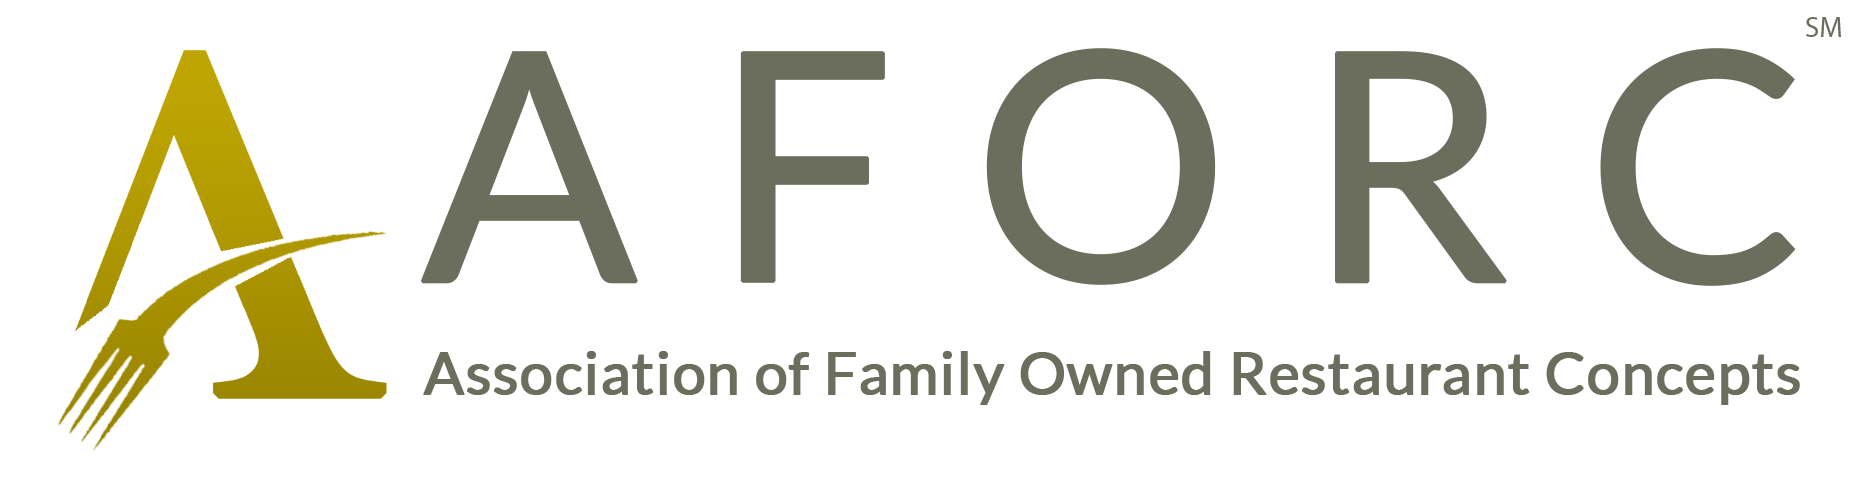 AFORC | Association of Family Owned Restaurant Concepts